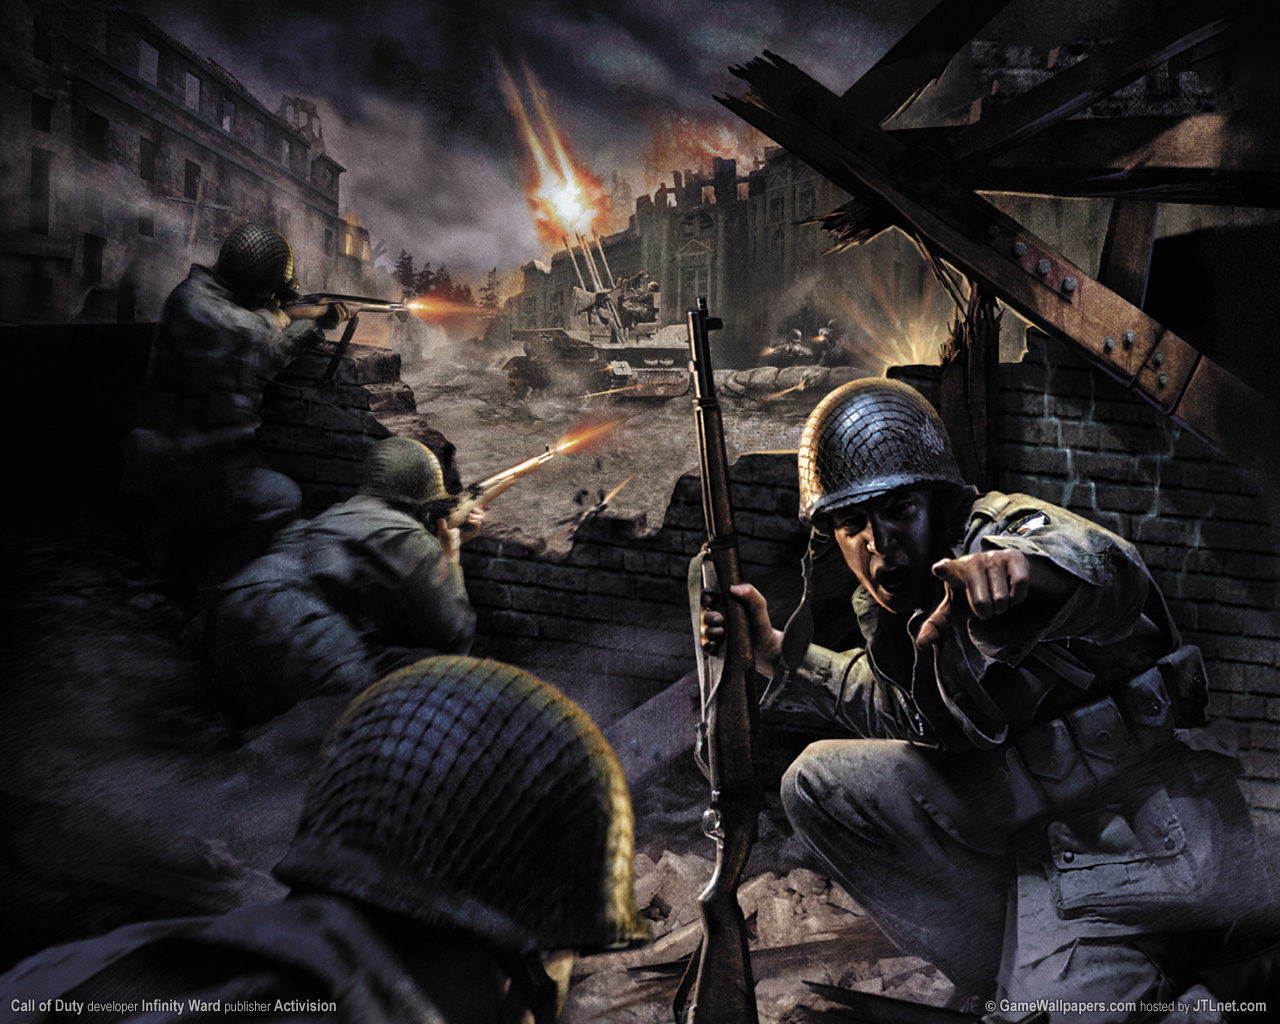  Game  Wallpapers  Call  of Duty  Game  Wallpapers 